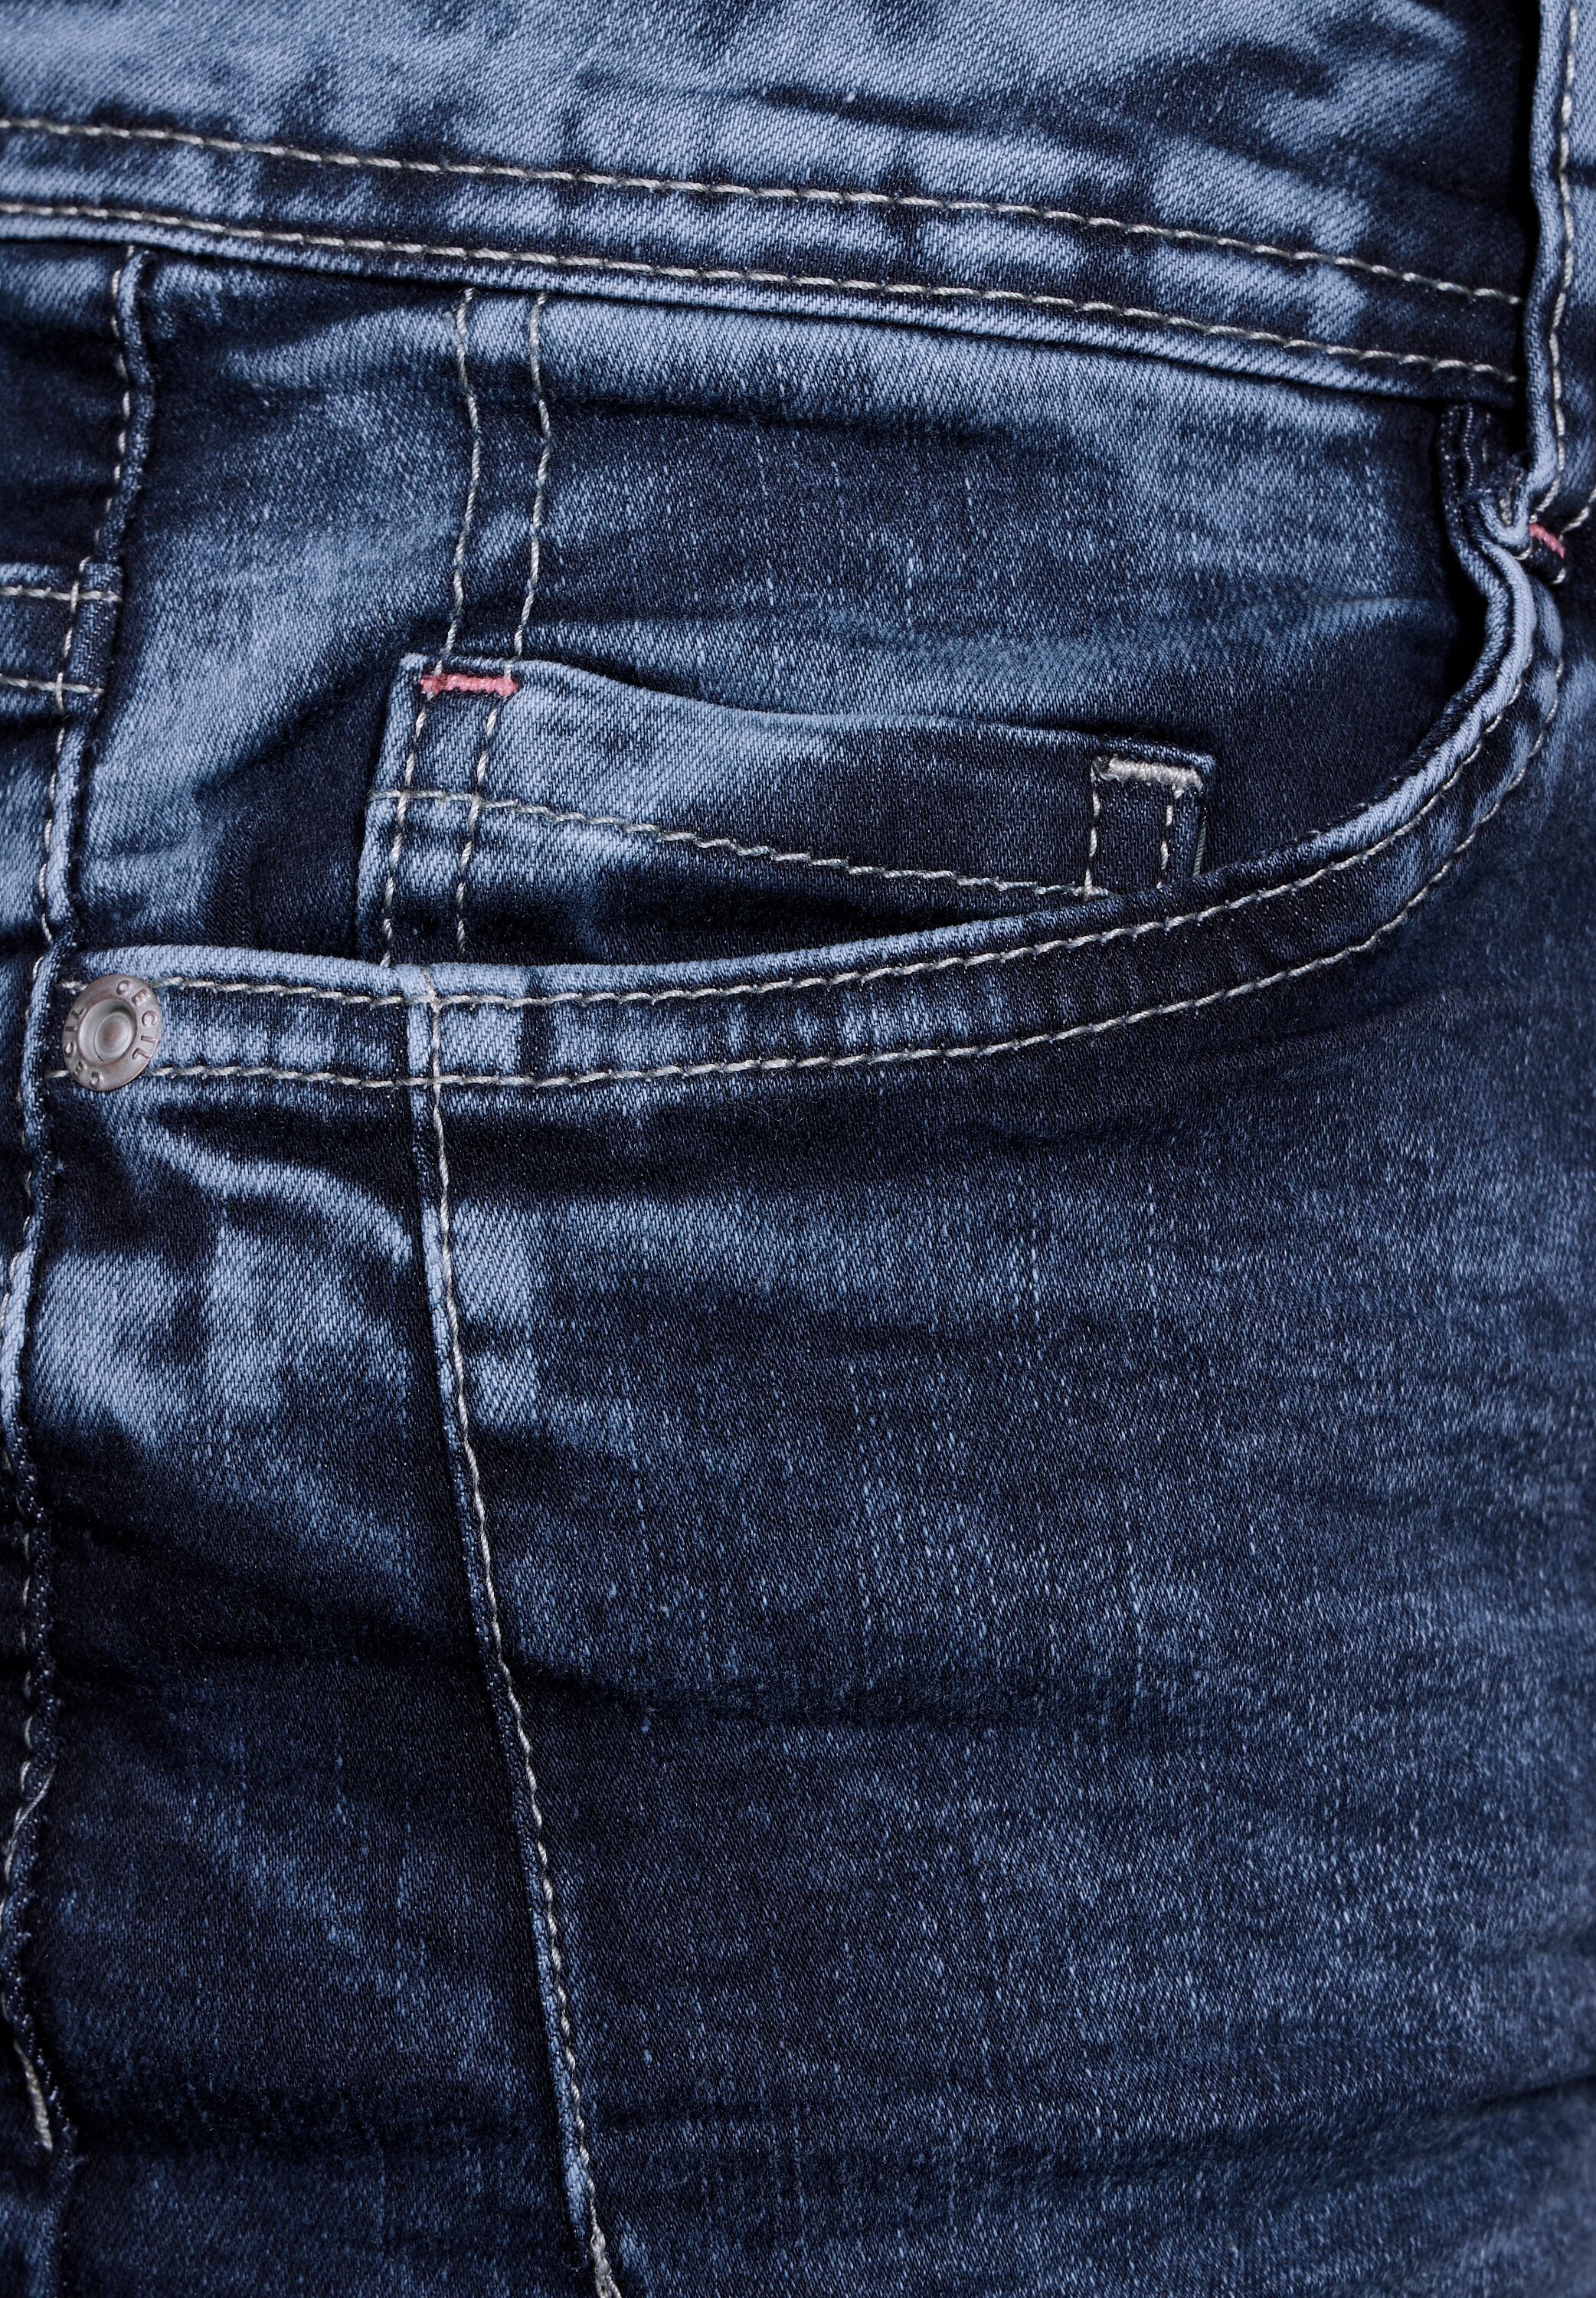 Cecil Bootcut-Jeans, in dunkelblauer Waschung